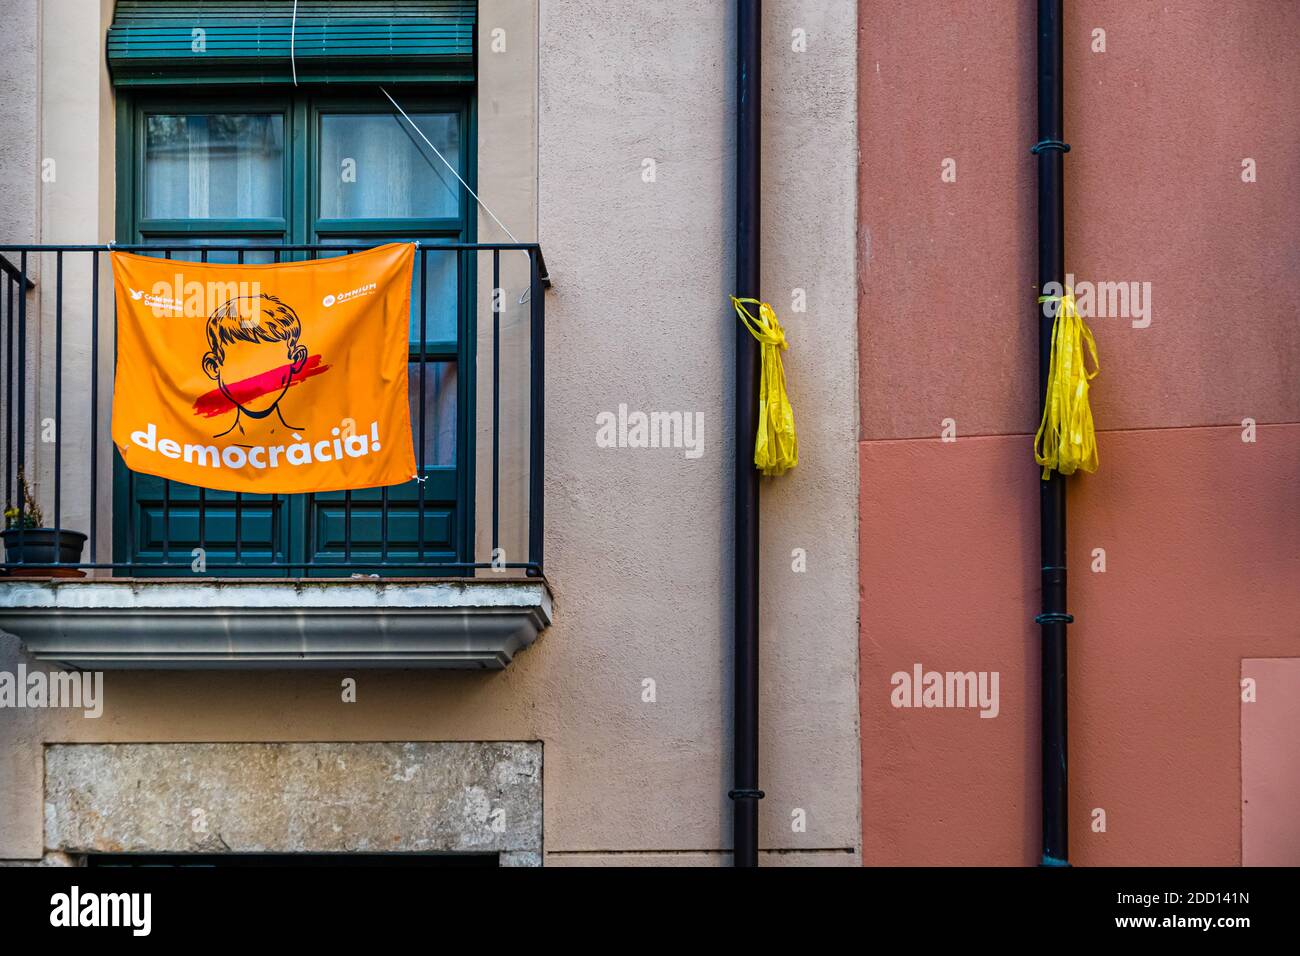 In many places in Catalonia there are protests against the Spanish central government, particularly because of the imprisonment of Catalan politicians and activists. Girona, Catalunya, Spain Stock Photo